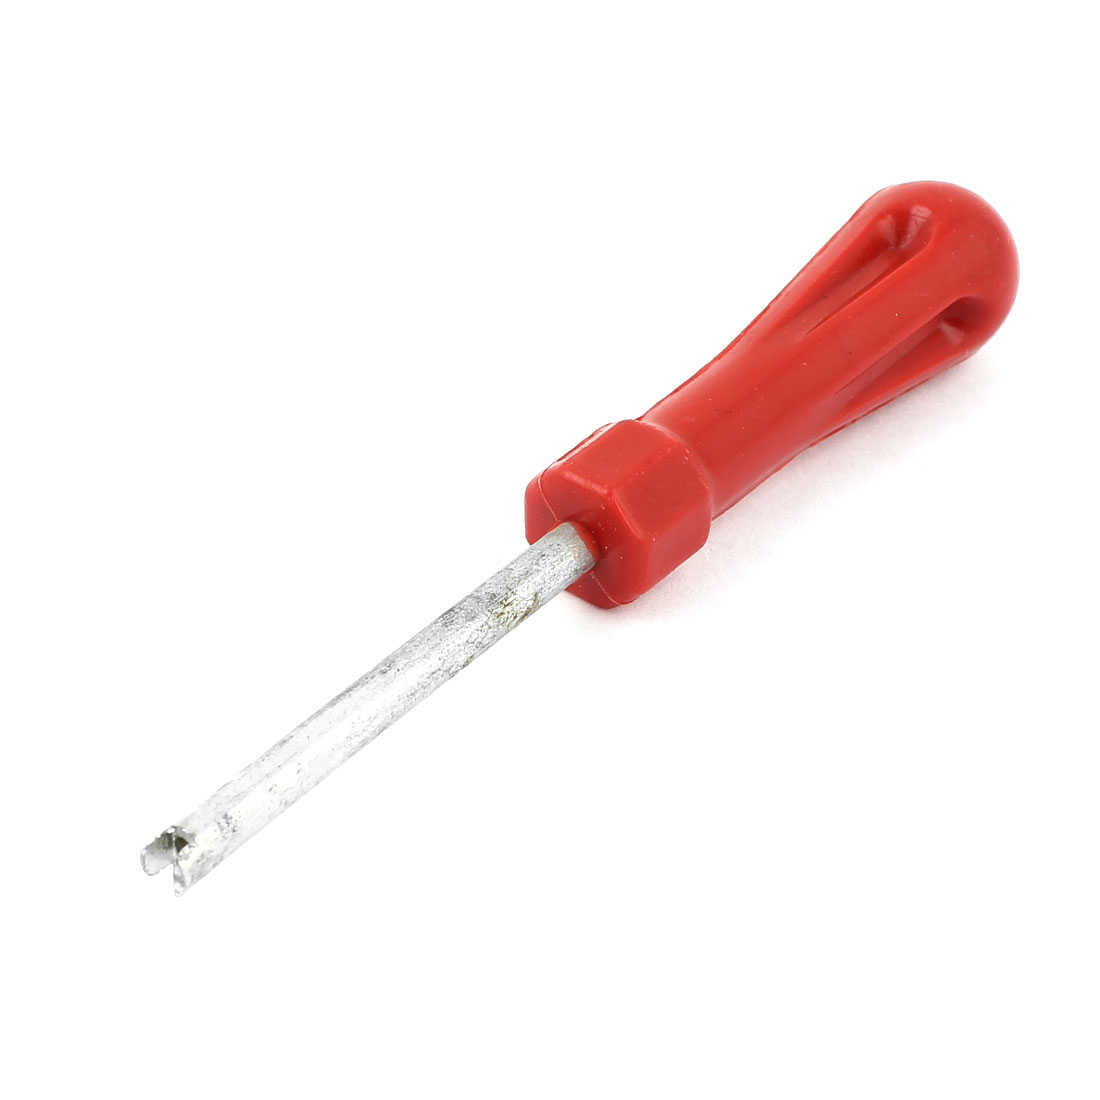 Red Slotted Handle Car Auto Valve Stem Core Removal Tool 110mm Length